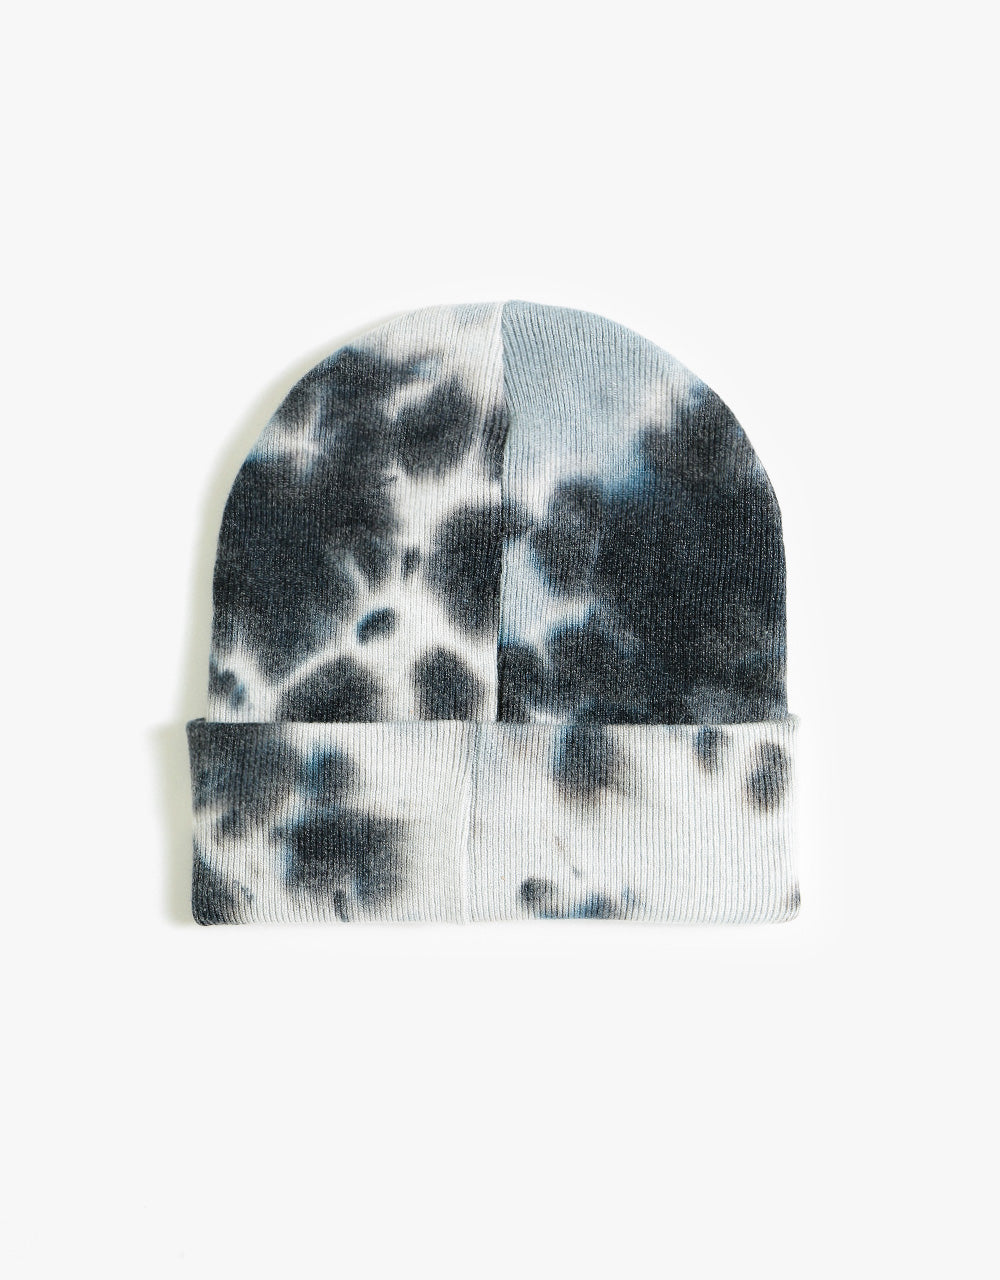 Route One Stay Cold Beanie - Black Tie Dye